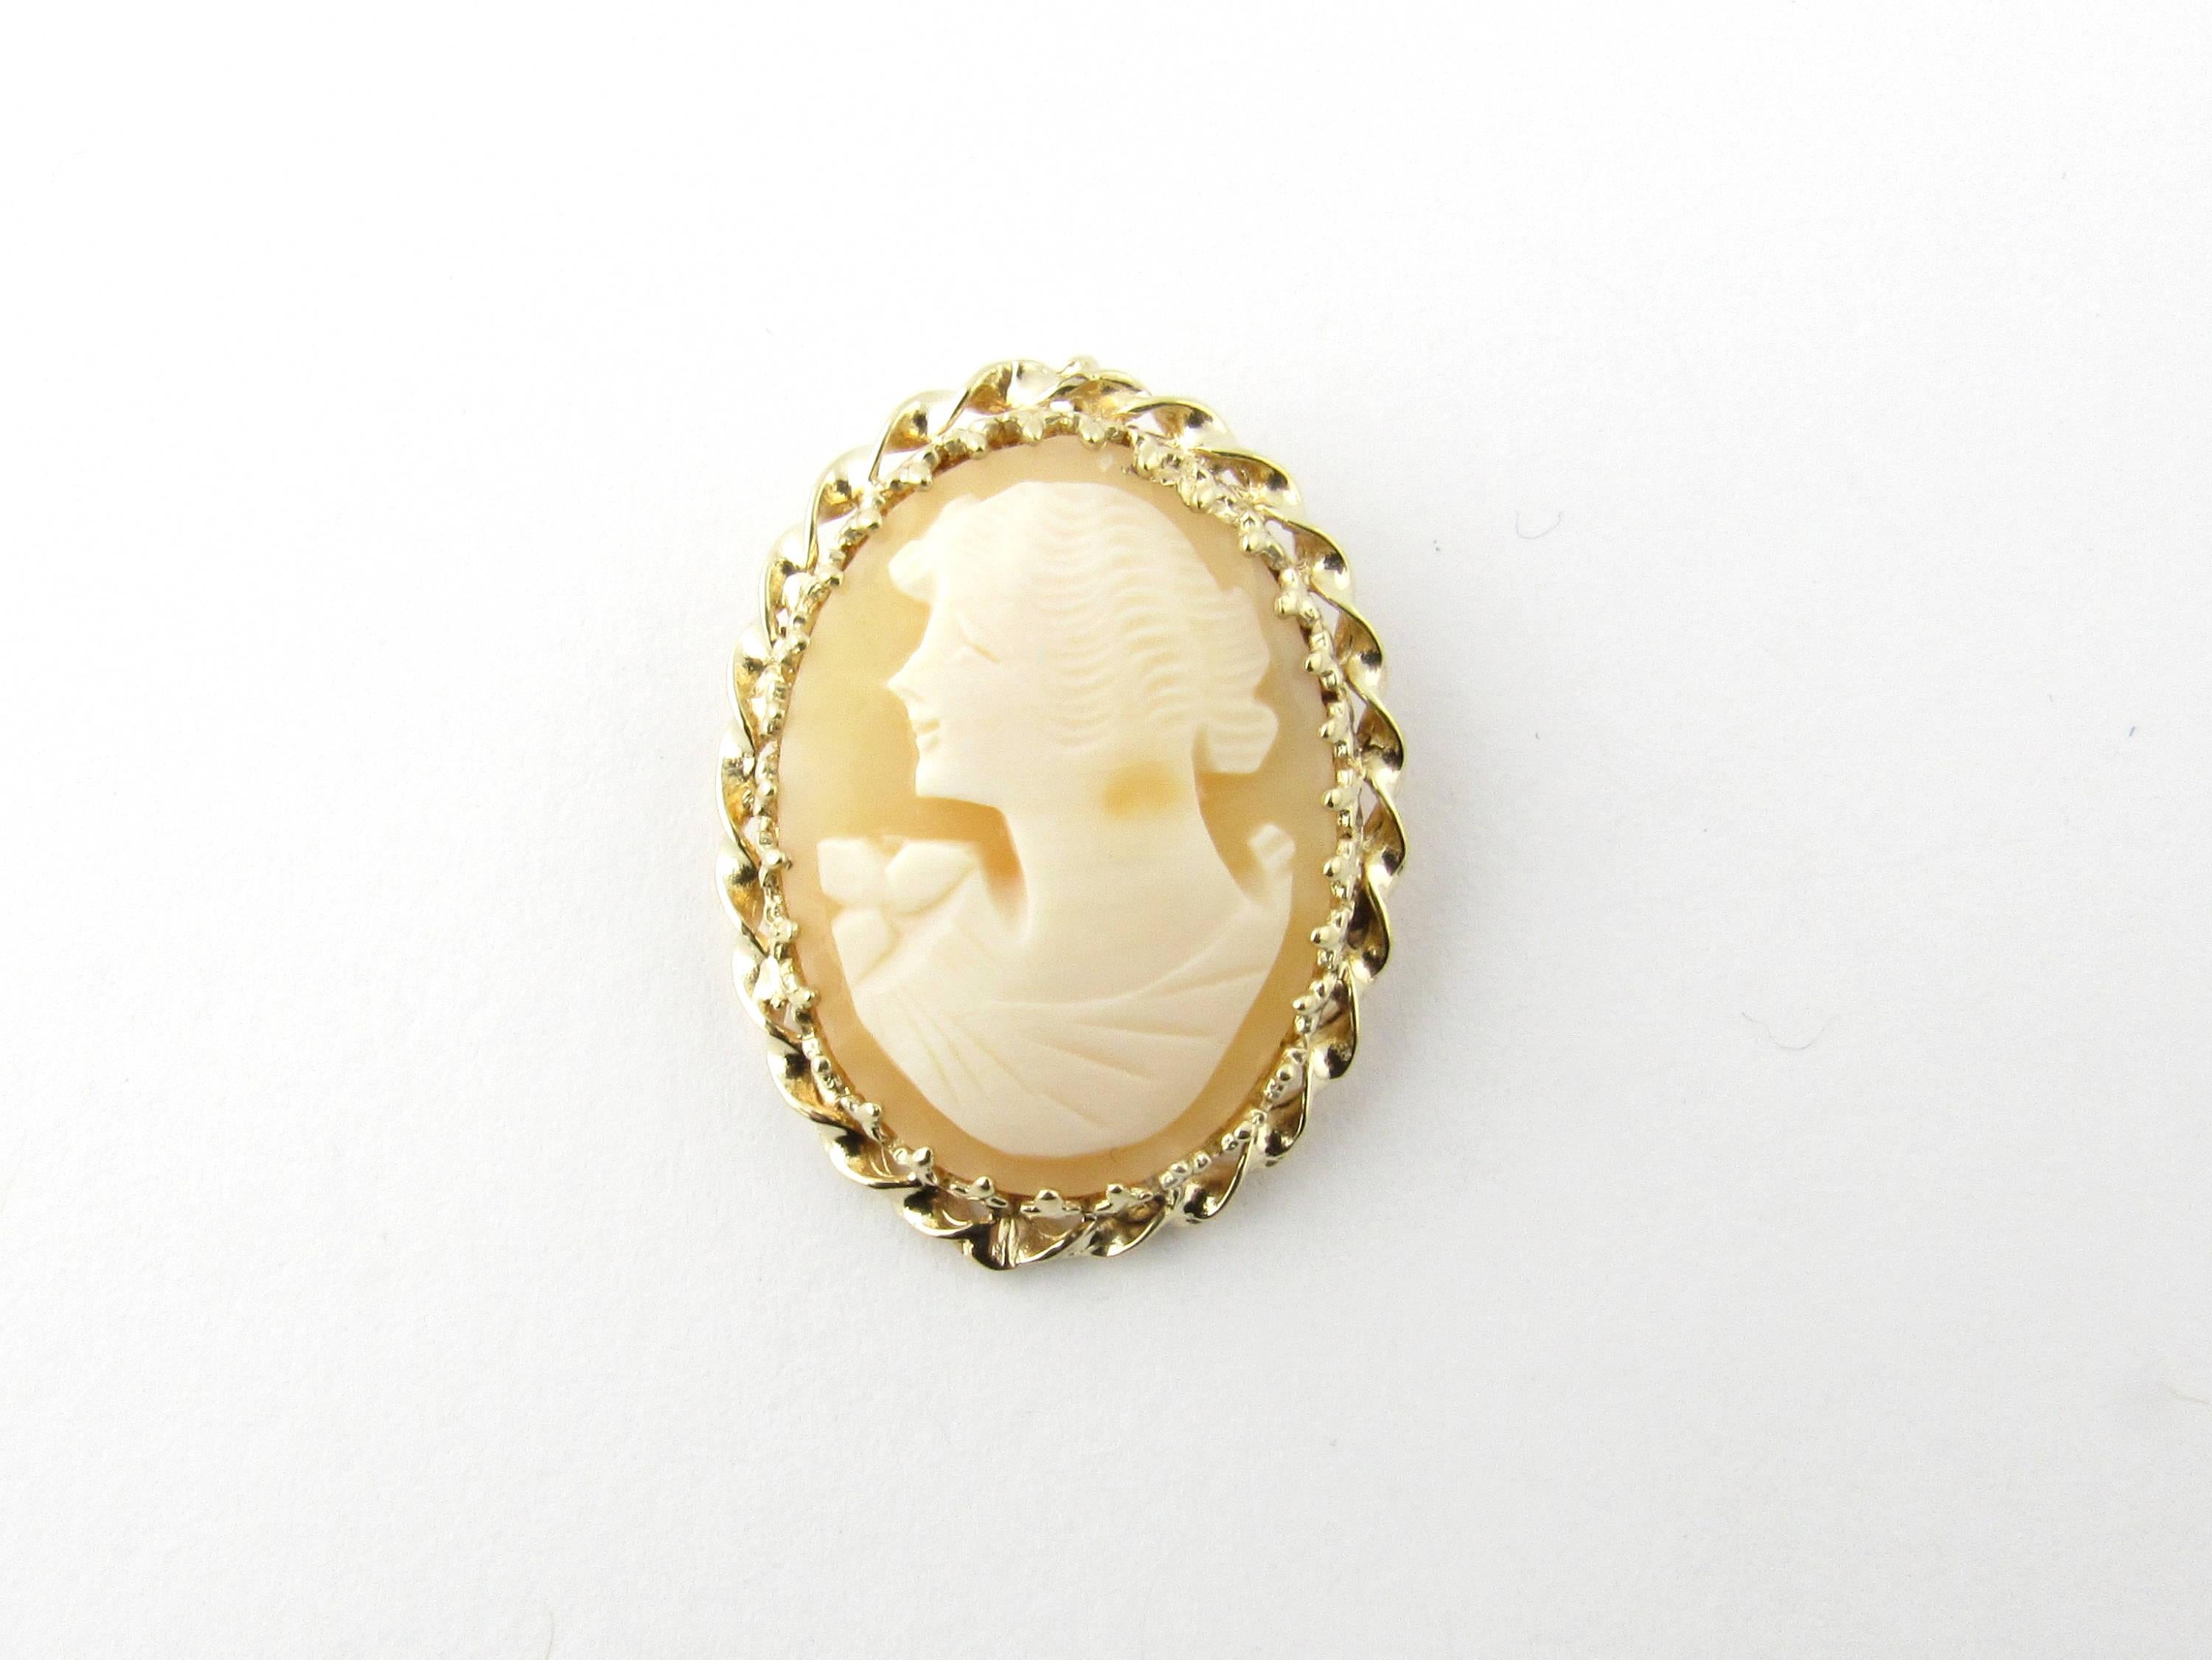 Vintage 14 Karat Yellow Gold Cameo Brooch/Pendant-

This lovely cameo features a lovely lady in profile. Framed in beautifully detailed 14K yellow gold. Can be worn as a brooch or a pendant.

Size: 30 mm x 23 mm

Weight: 3.2 dwt. / 5.0